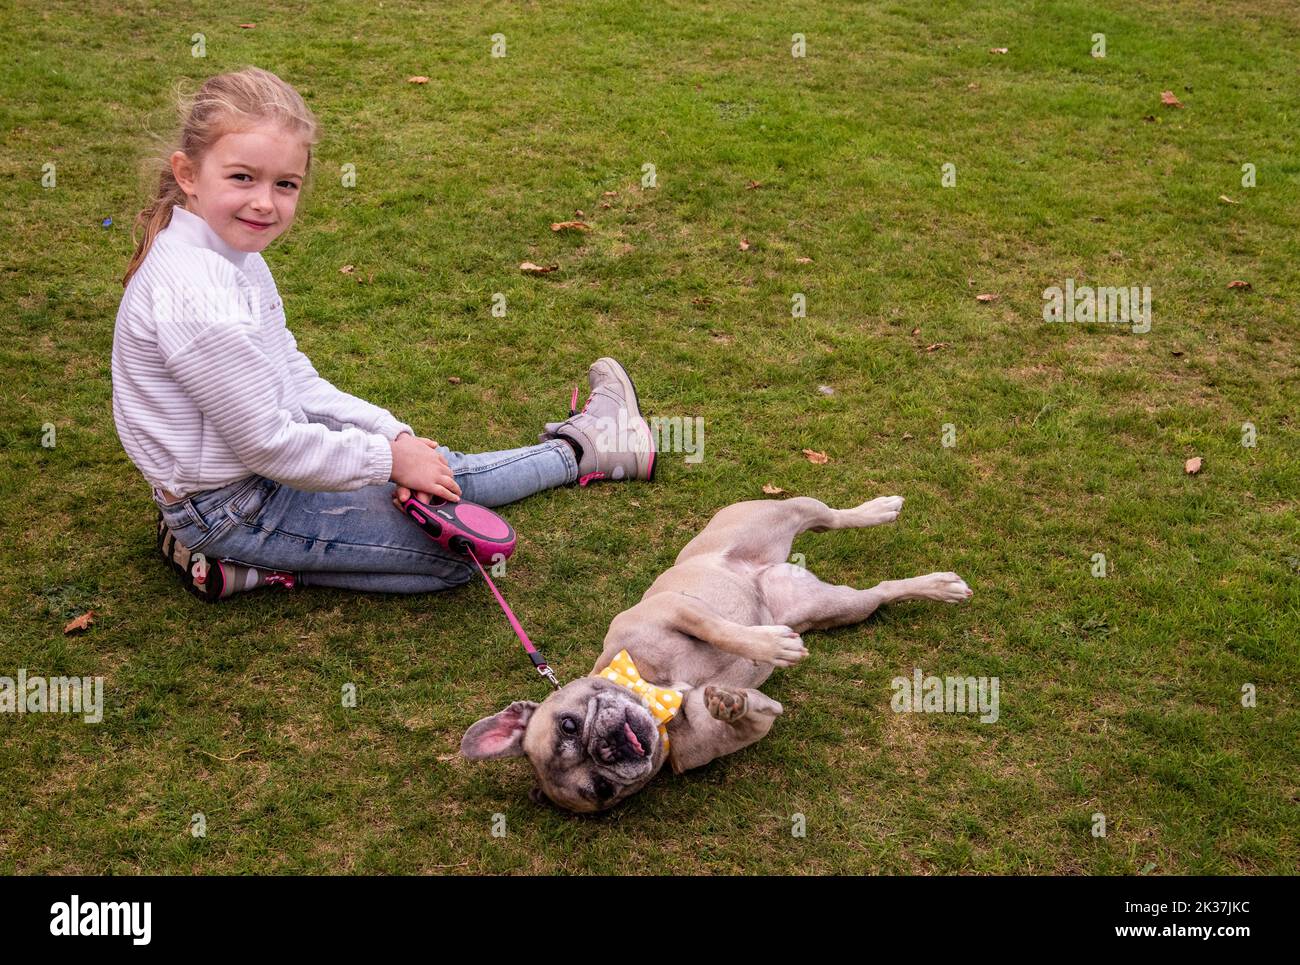 Follifoot, near Harrogate, North Yorkshire, 25th September 2022. The Follifoot Dog Festival where dog lovers were able to show off their beloved pets today. Bulldog Luna posing with young owner Mila. Picture Credit: ernesto rogata/Alamy Live News Stock Photo